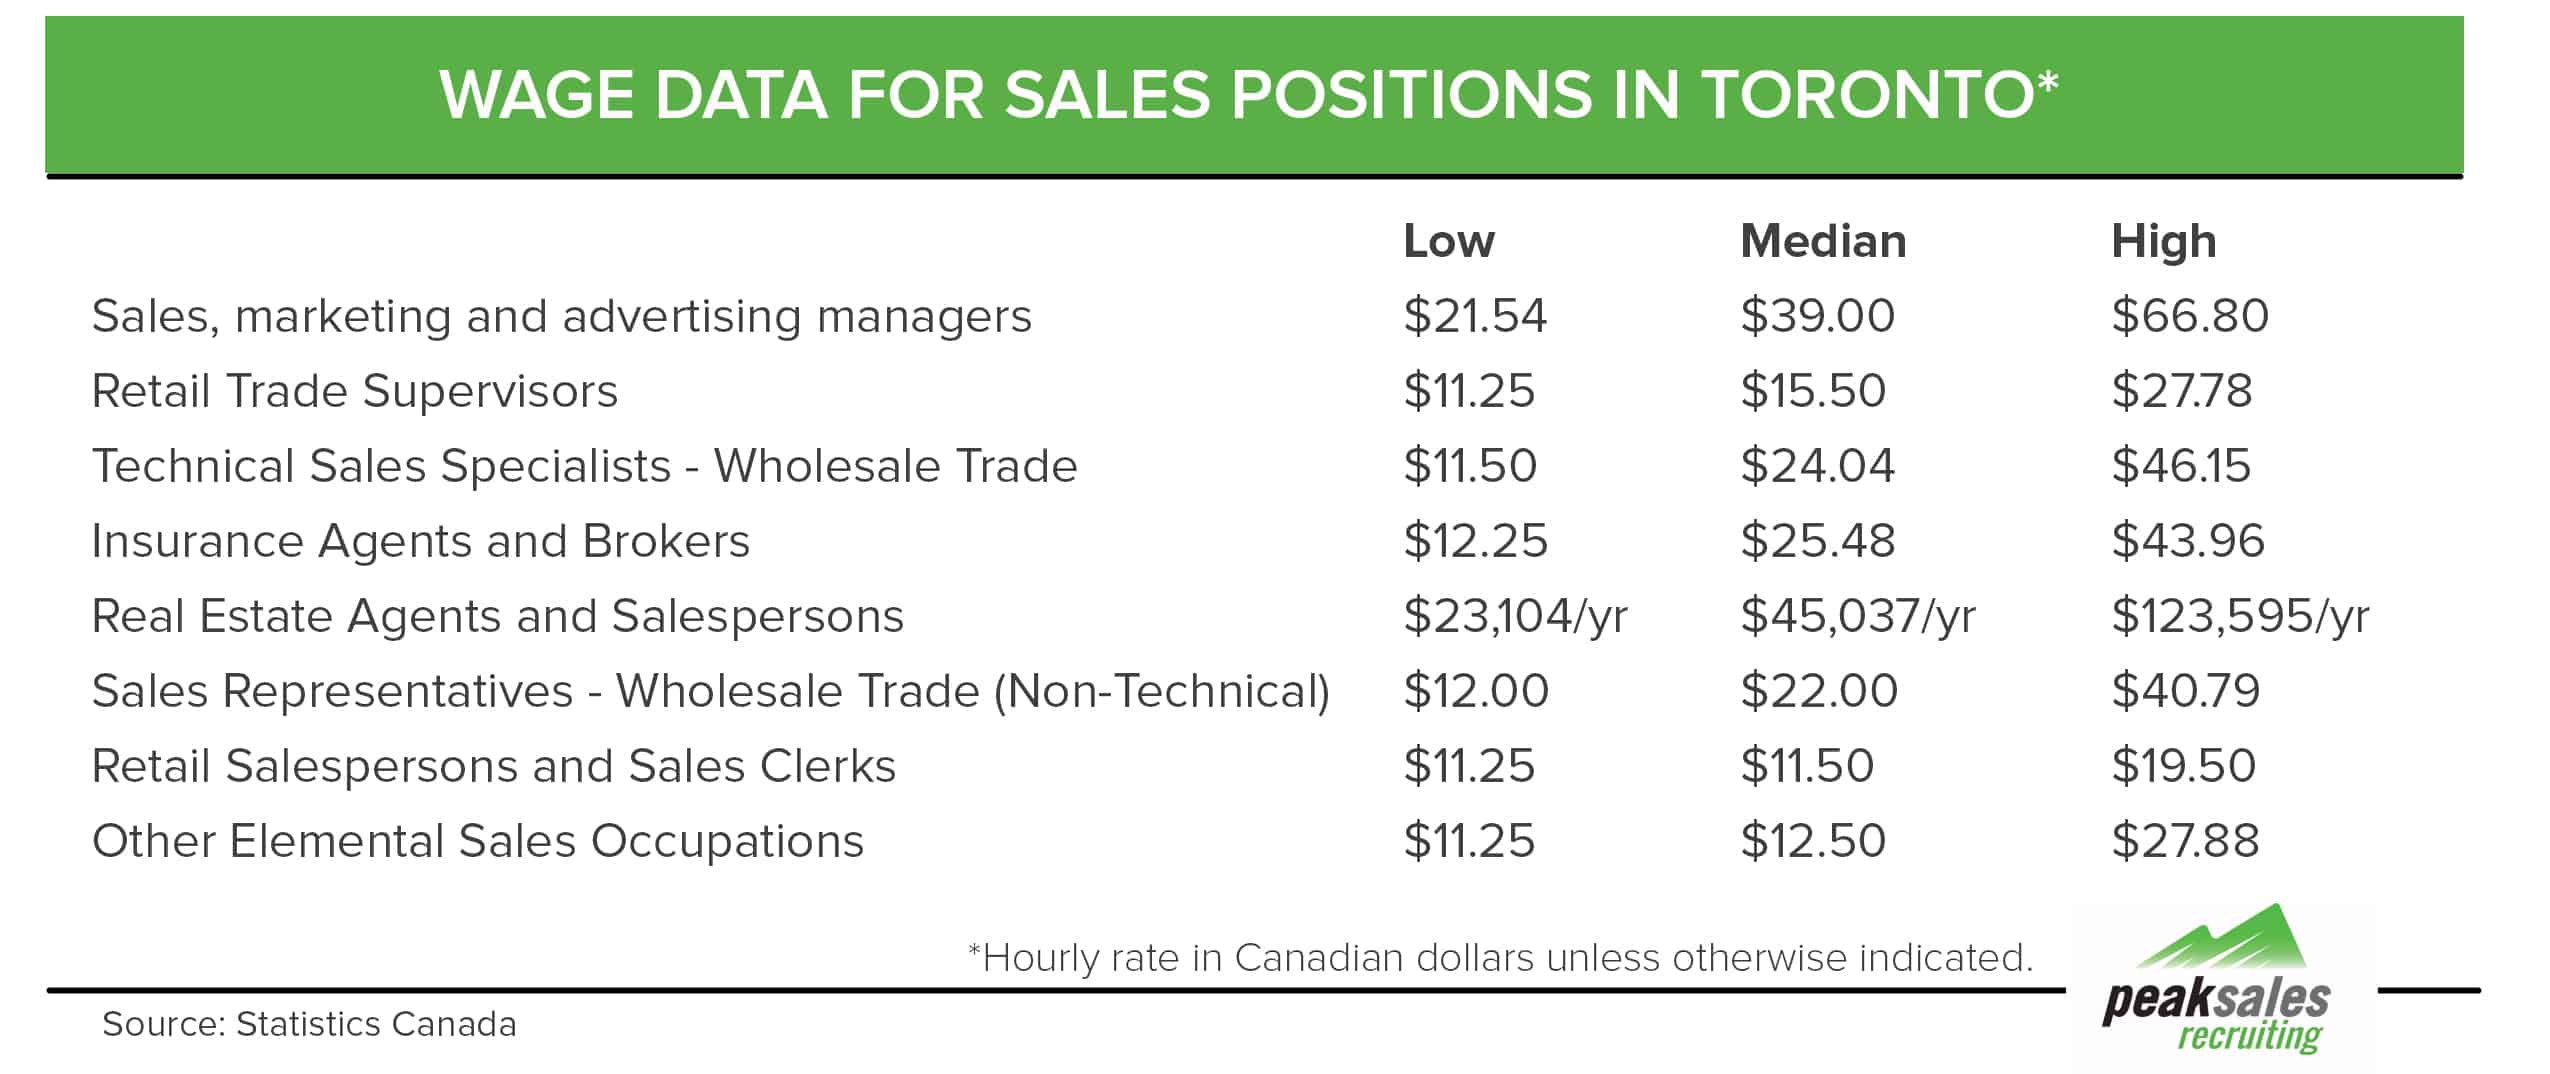 Wage Data for Sales Positions in Toronto